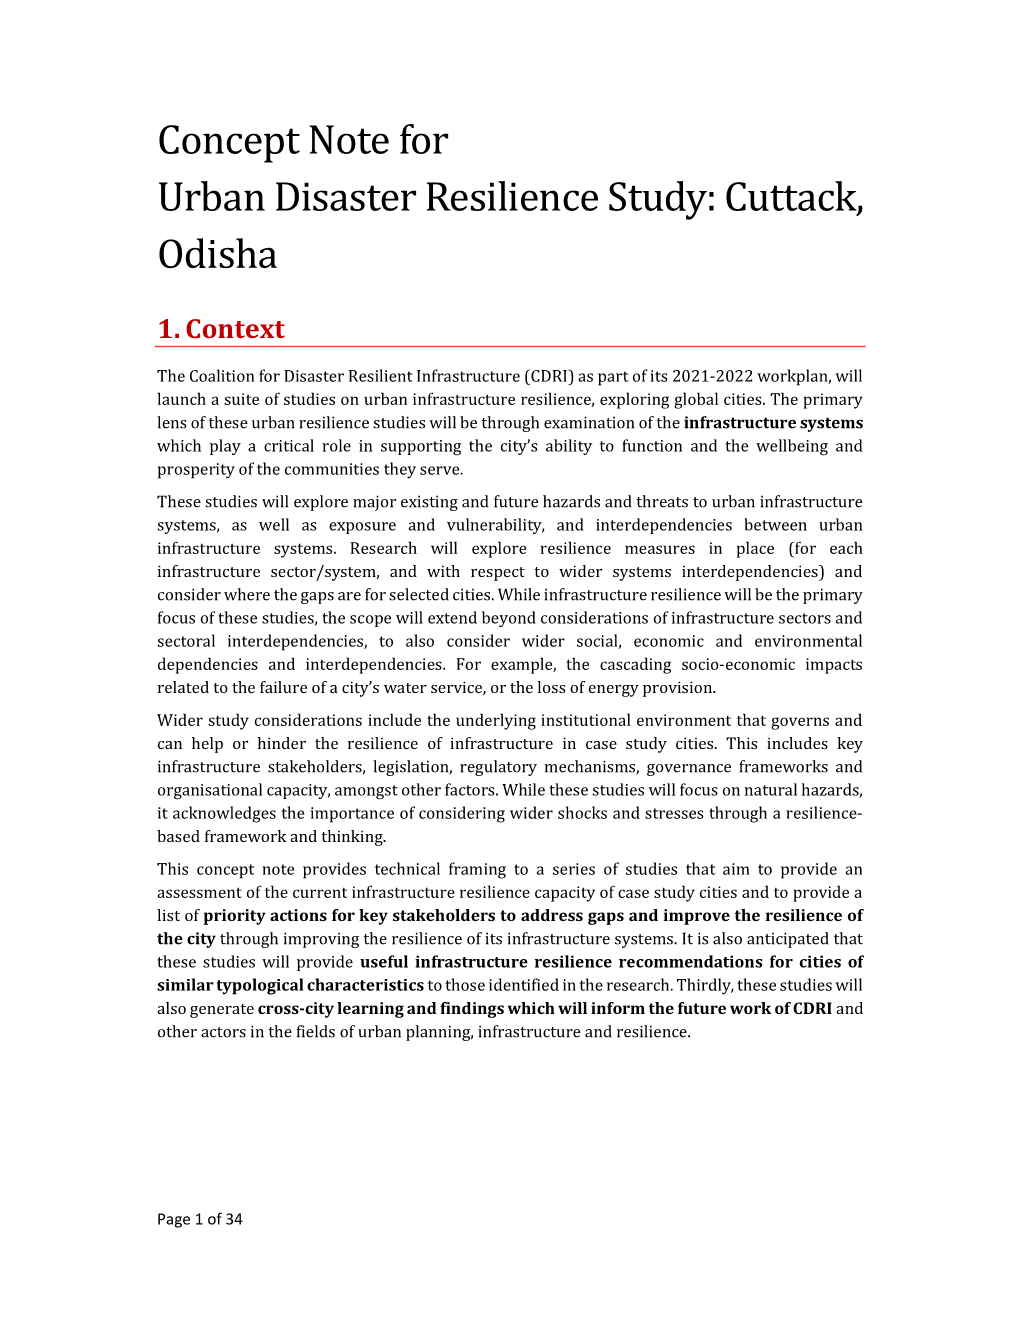 Concept Note for Urban Disaster Resilience Study: Cuttack, Odisha